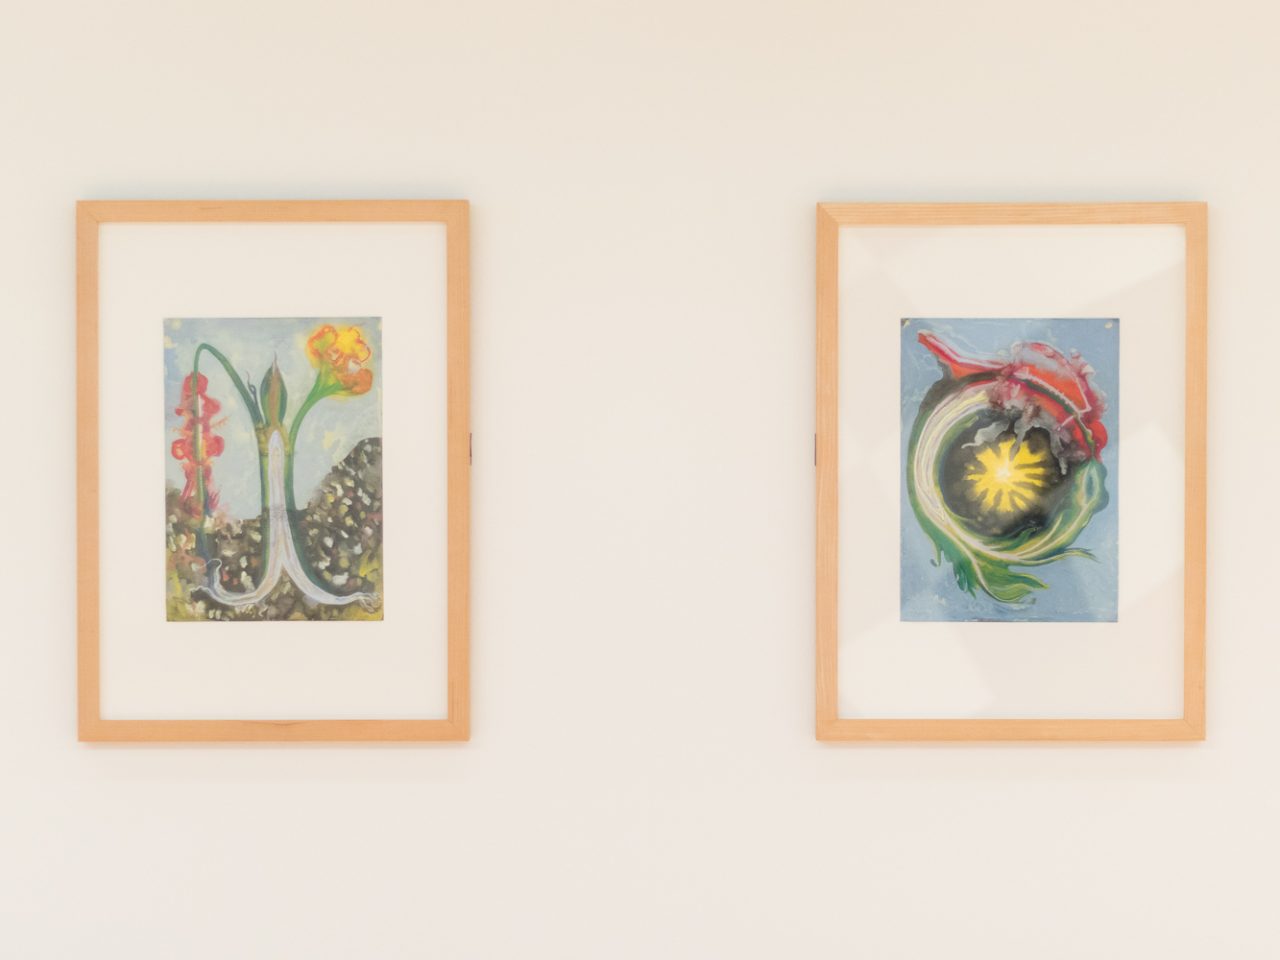 Two paintings both colourful with earthly elements of flowers, soil and sun, representing the process of growing.